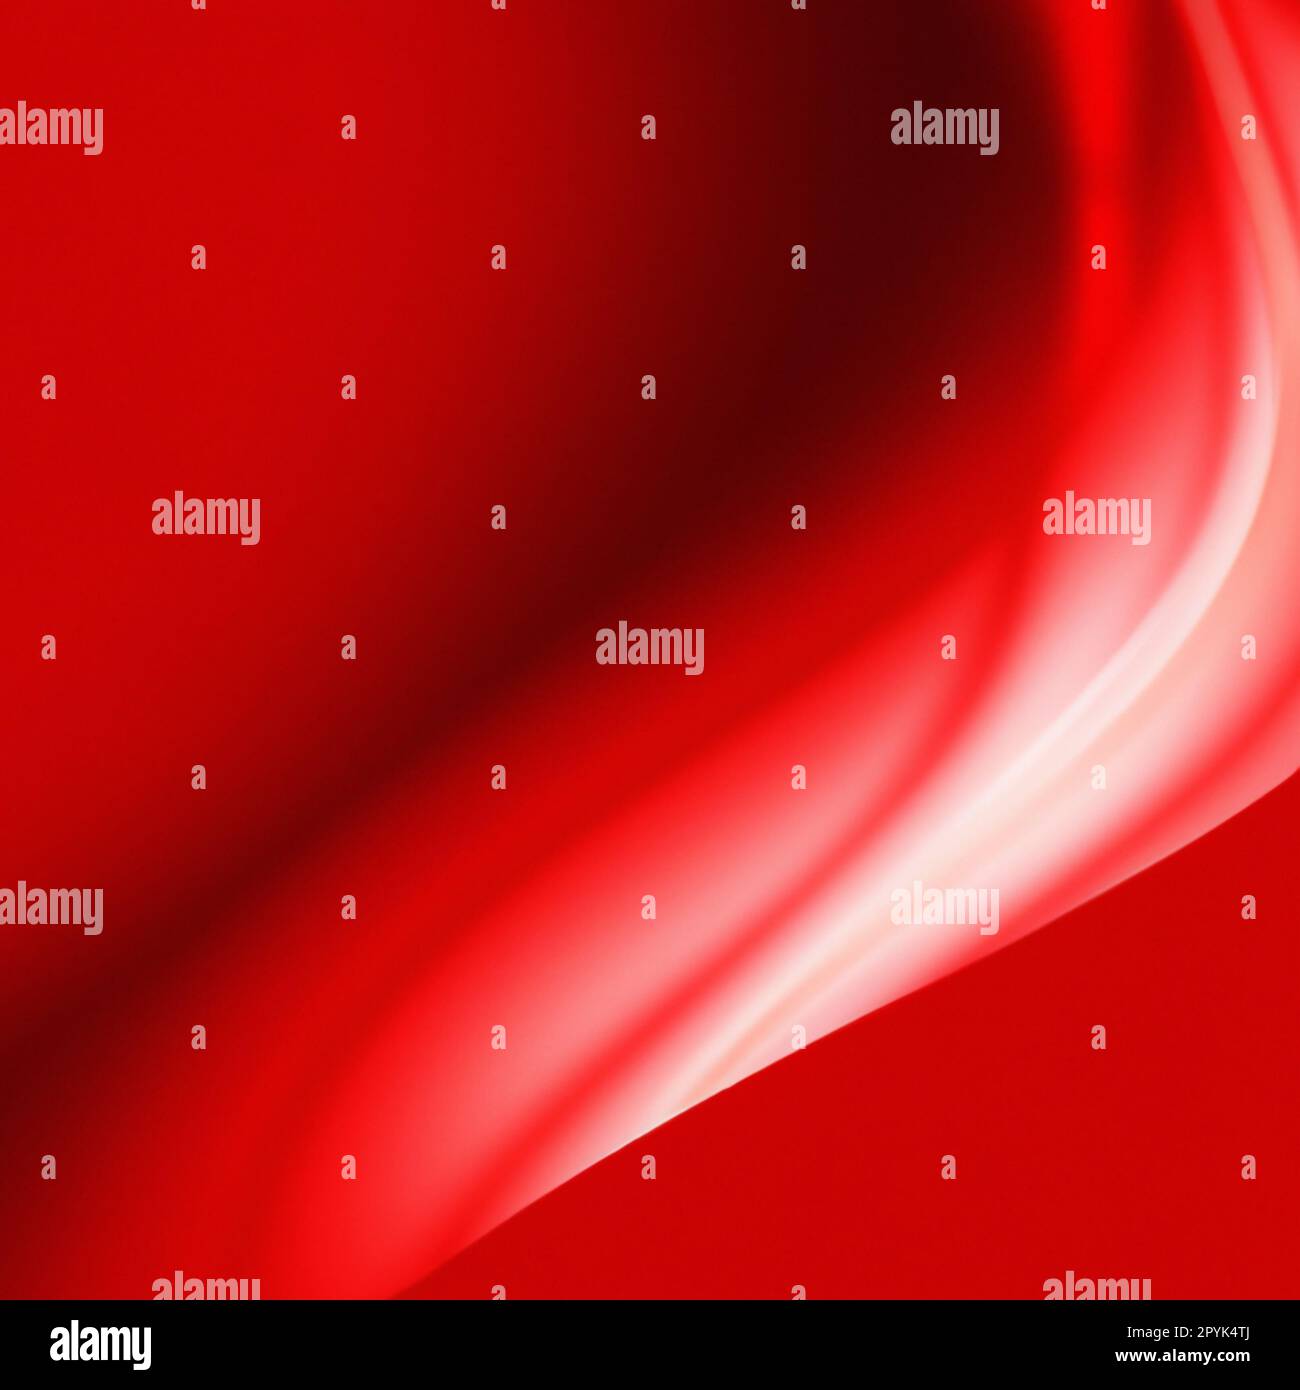 Red abstract gradient background with dark and light stains and smooth lines. Stock Photo